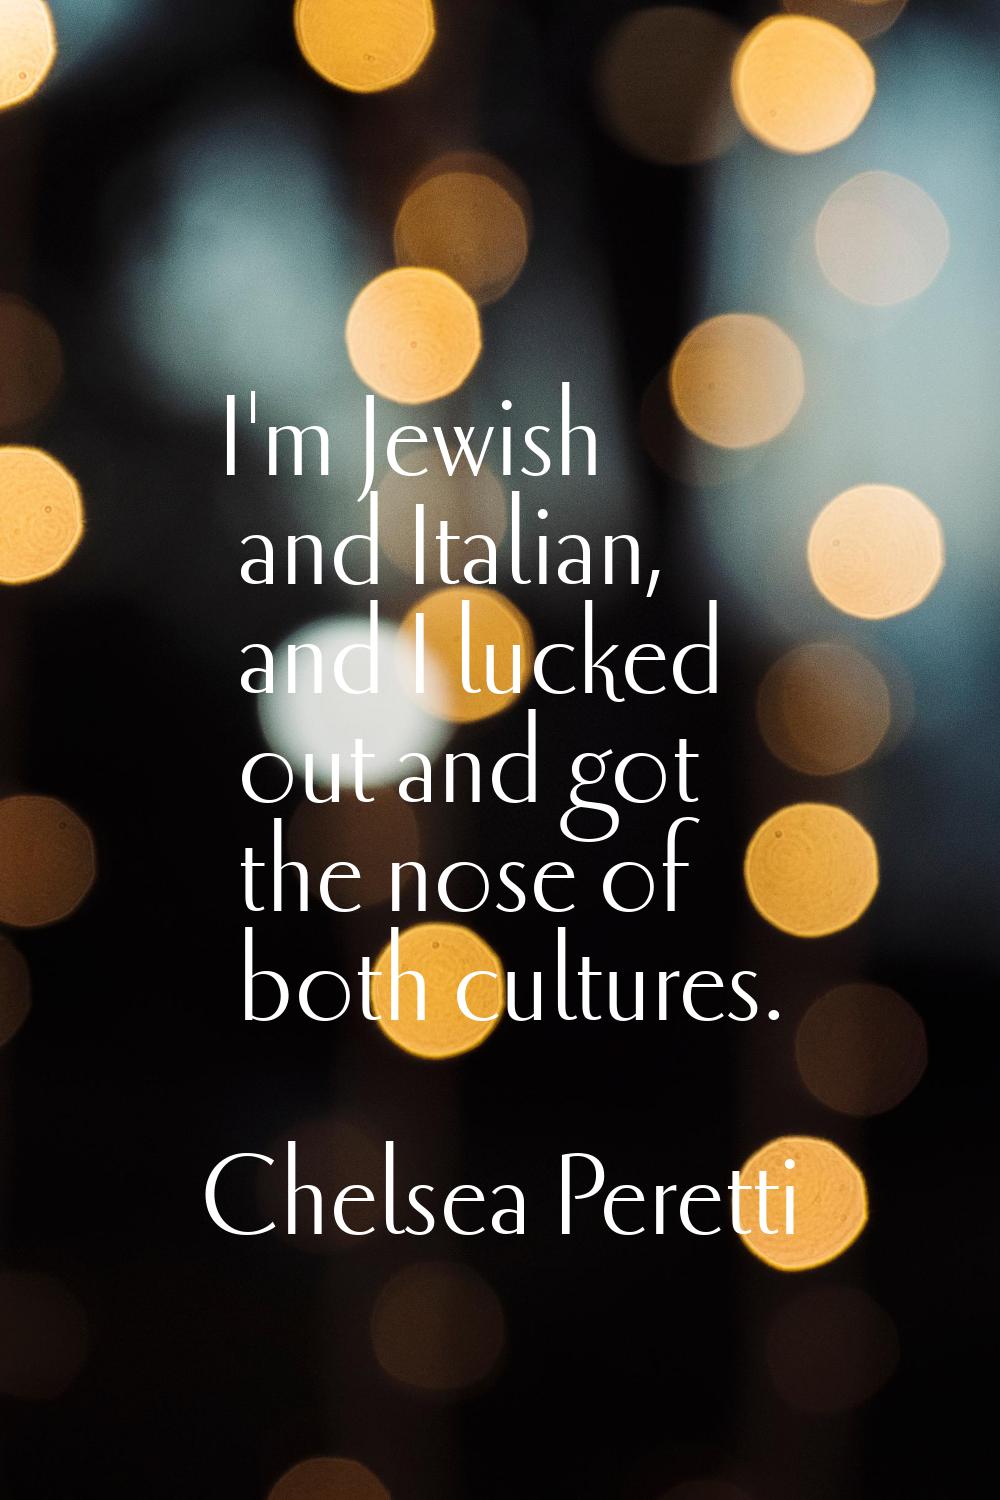 I'm Jewish and Italian, and I lucked out and got the nose of both cultures.